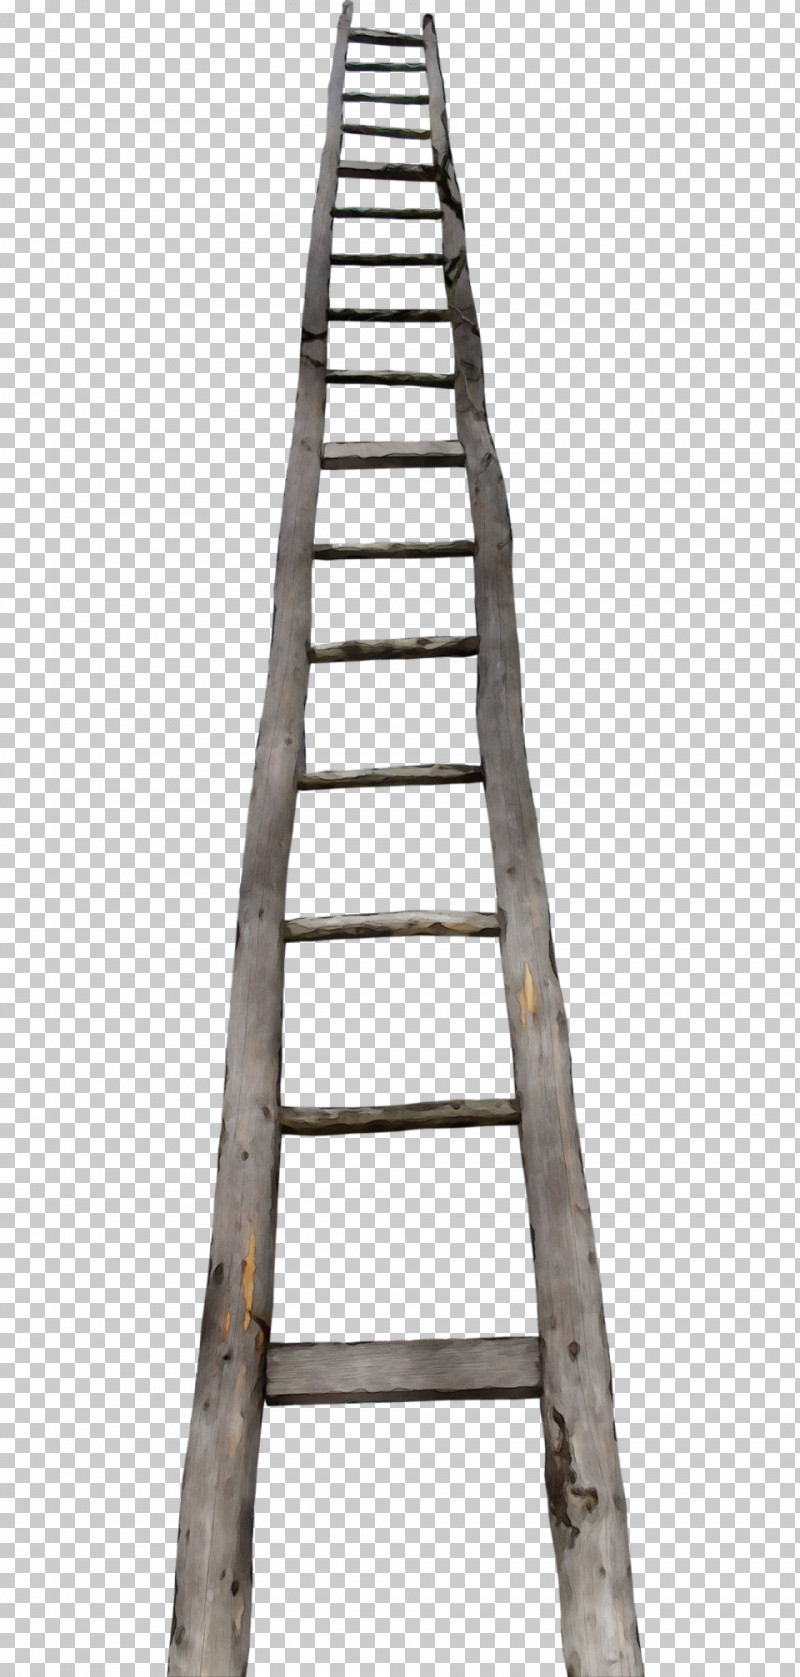 Ladder Furniture Tool Wood Steel PNG, Clipart, Furniture, Ladder, Metal, Paint, Steel Free PNG Download